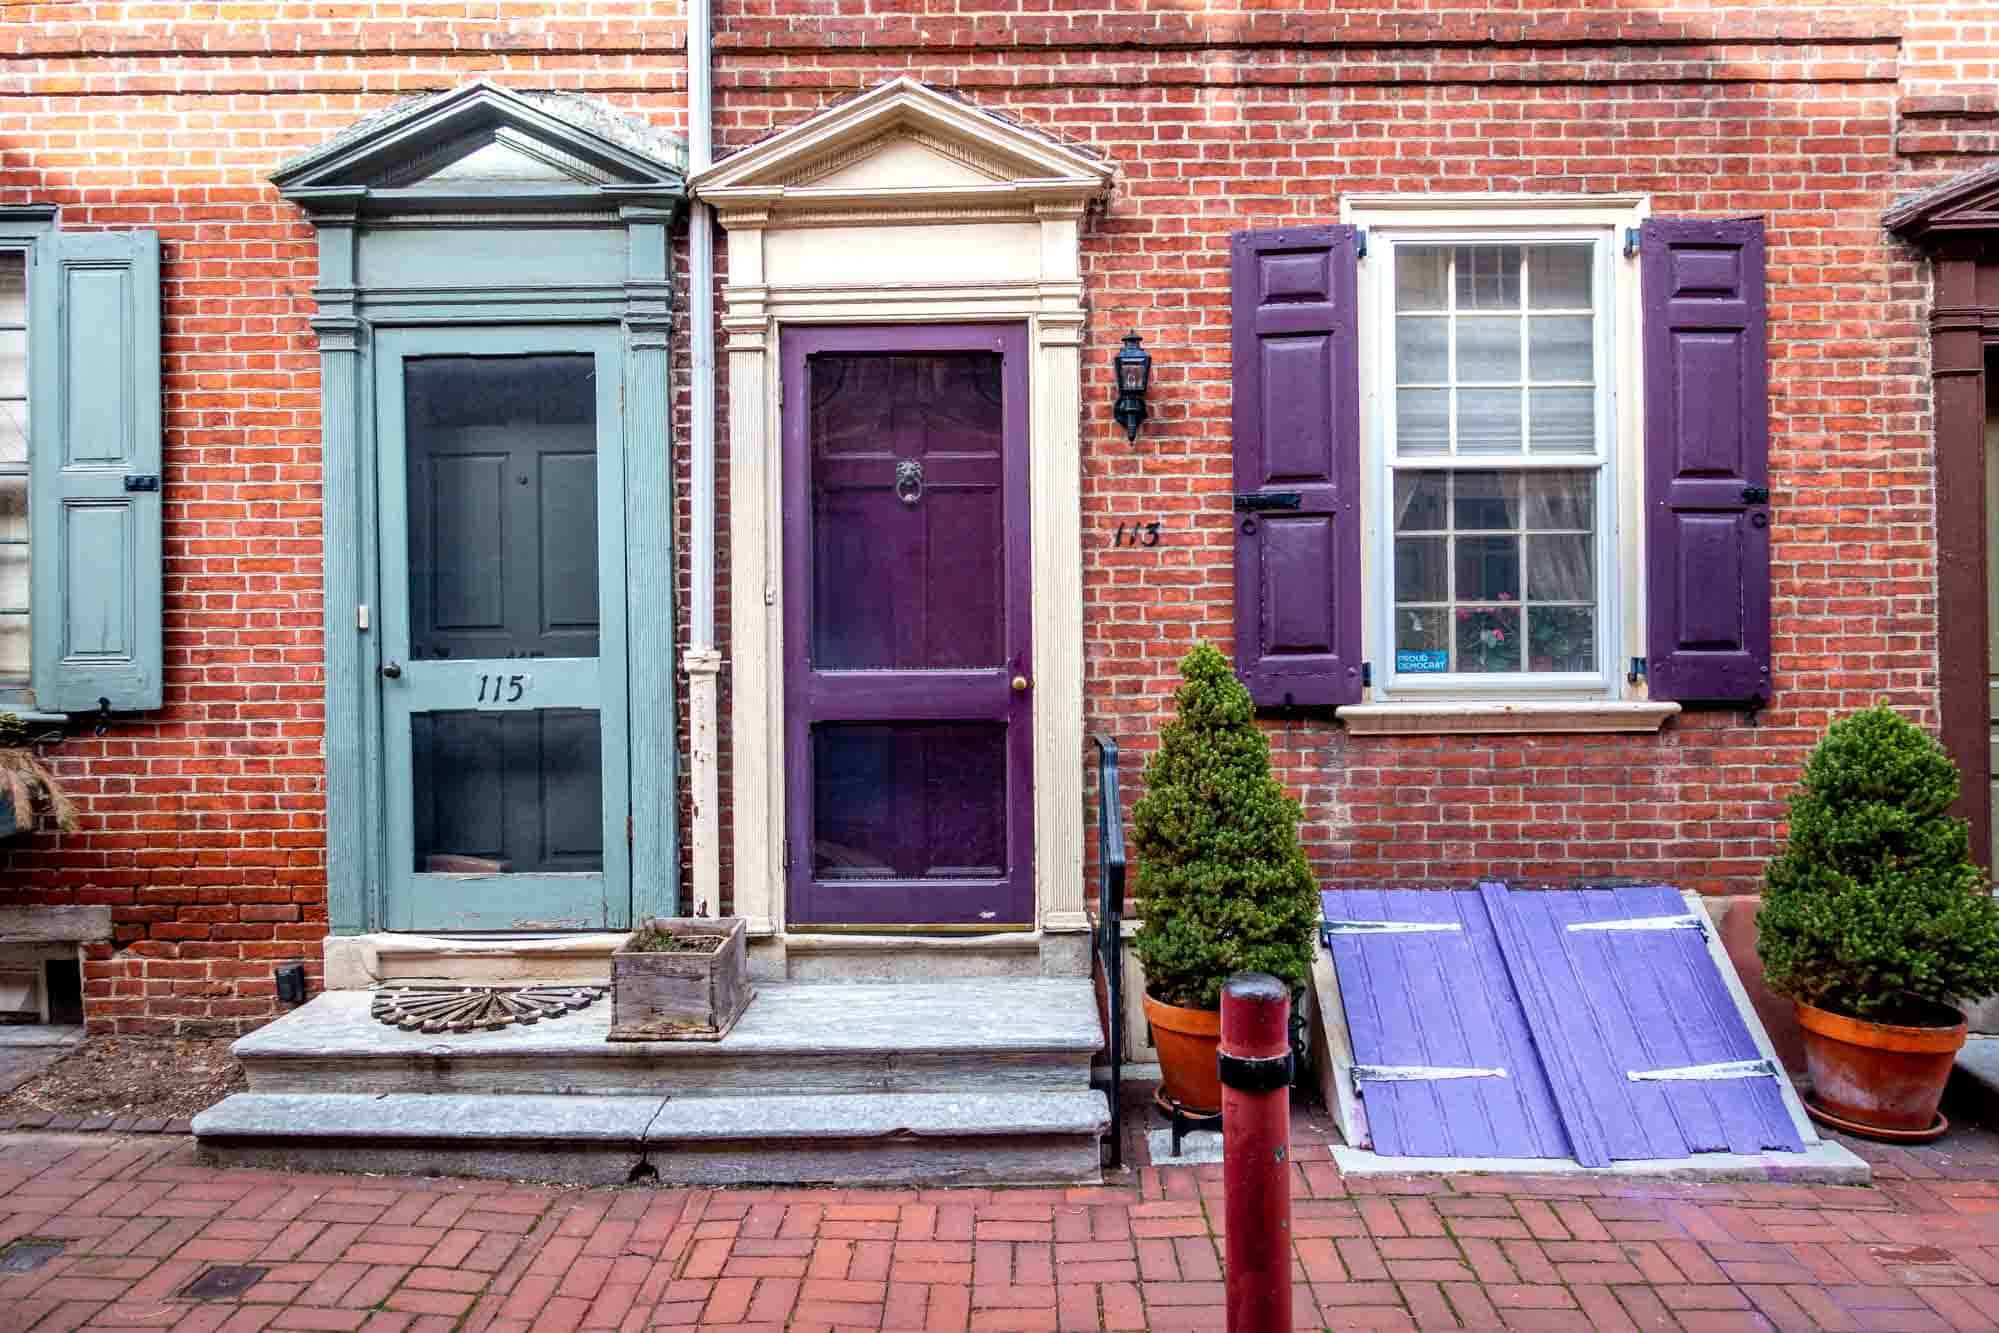 Two brick row homes--one with a blue door and one with a purple door and shutters